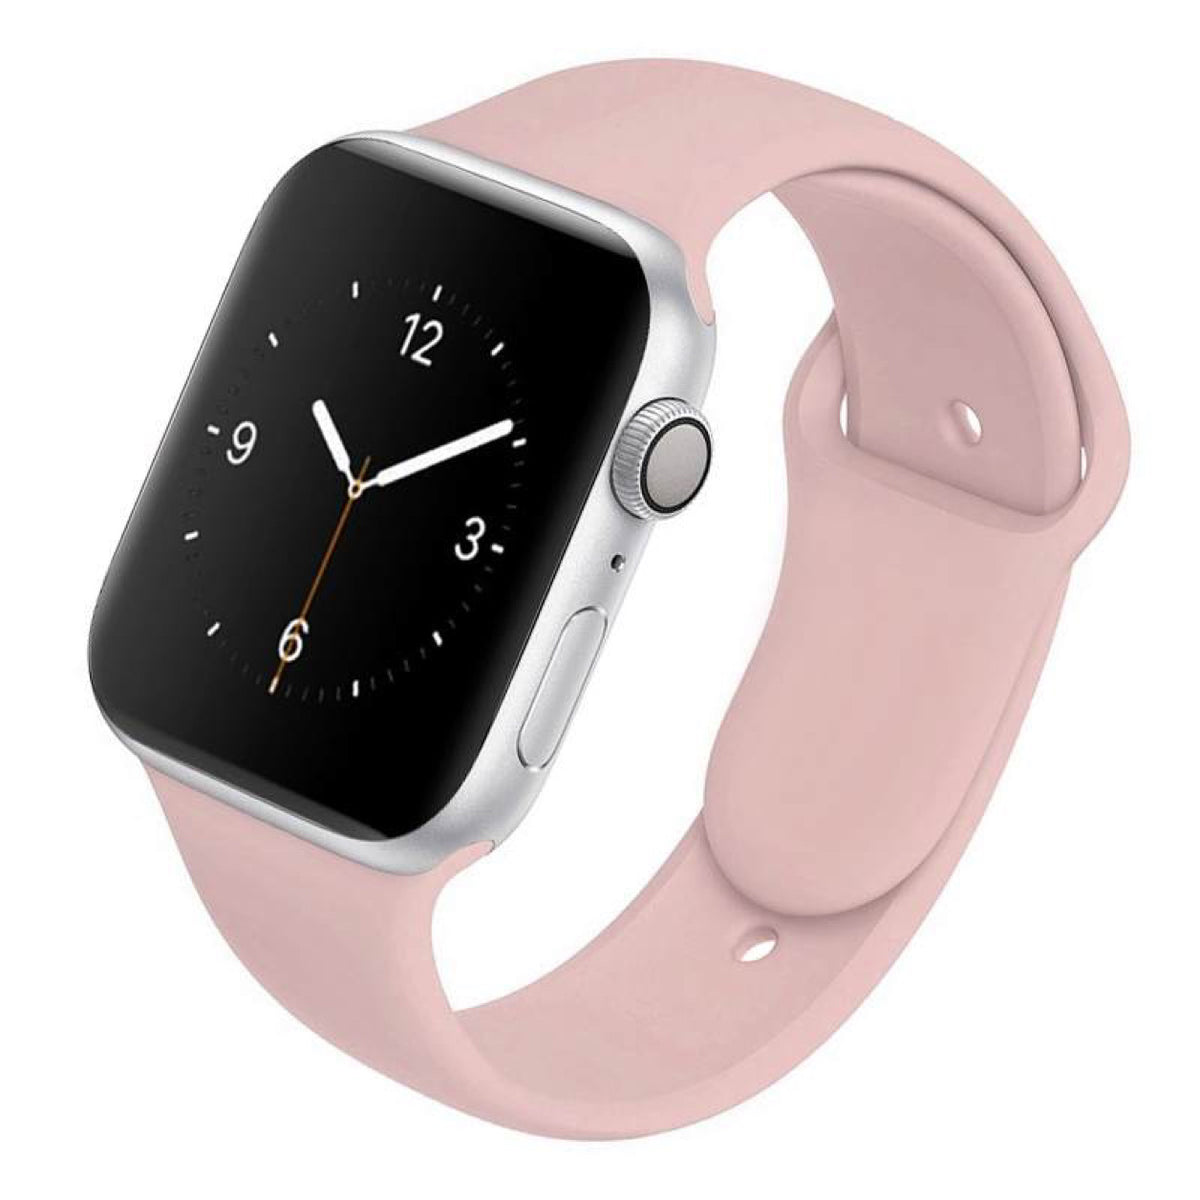 Light Pink Apple Watch Strap - thefonecasecompany